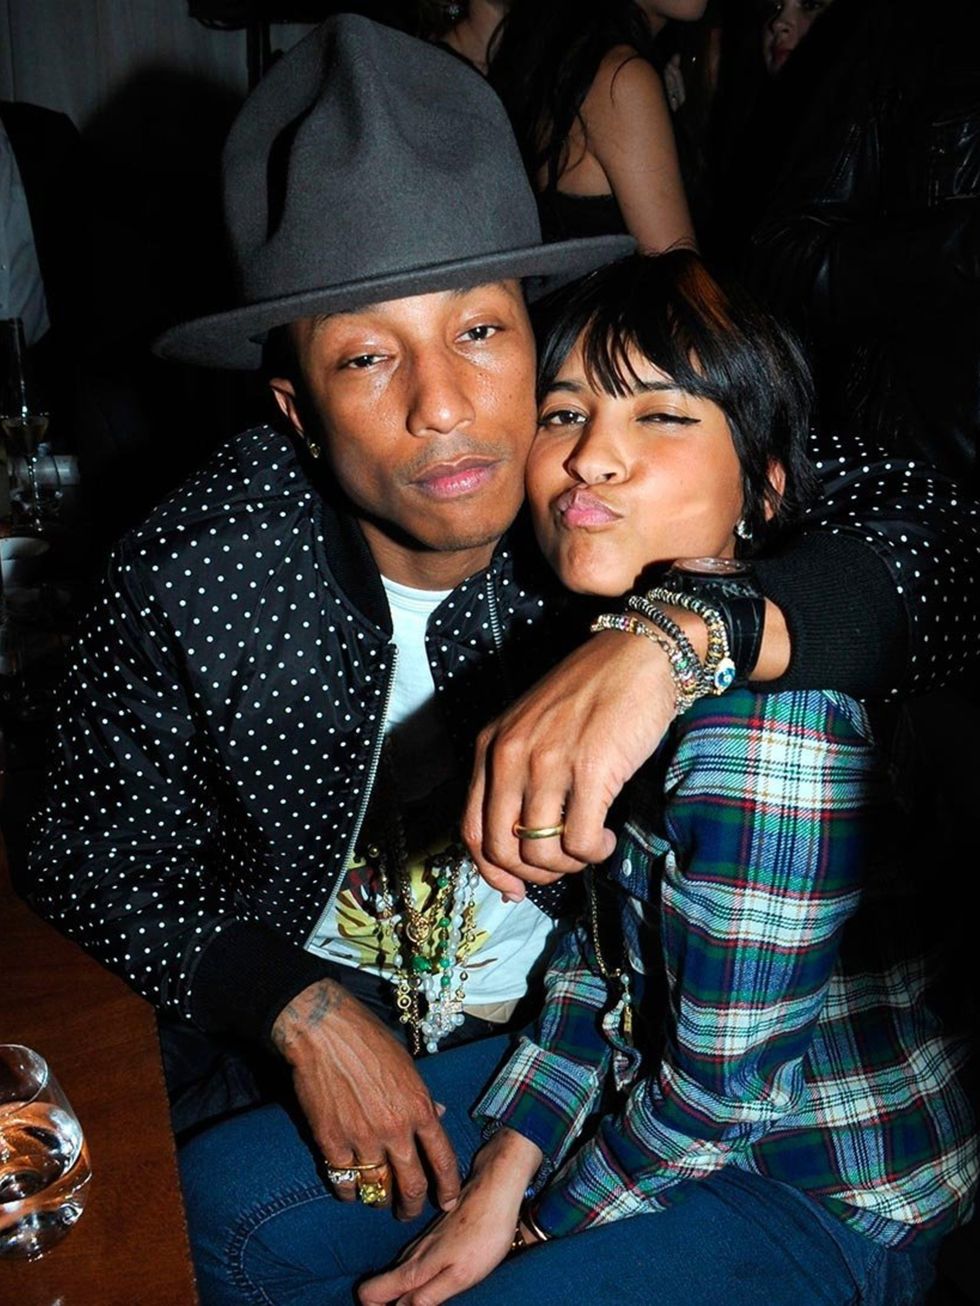 <p><a href="http://www.elleuk.com/elle-style-awards/red-carpet/elle-style-awards-2014-the-winners">Pharrell Williams</a> and Helen Lasichanh at the BRITs 2014 Universal after-party at the Soho House pop up.</p>